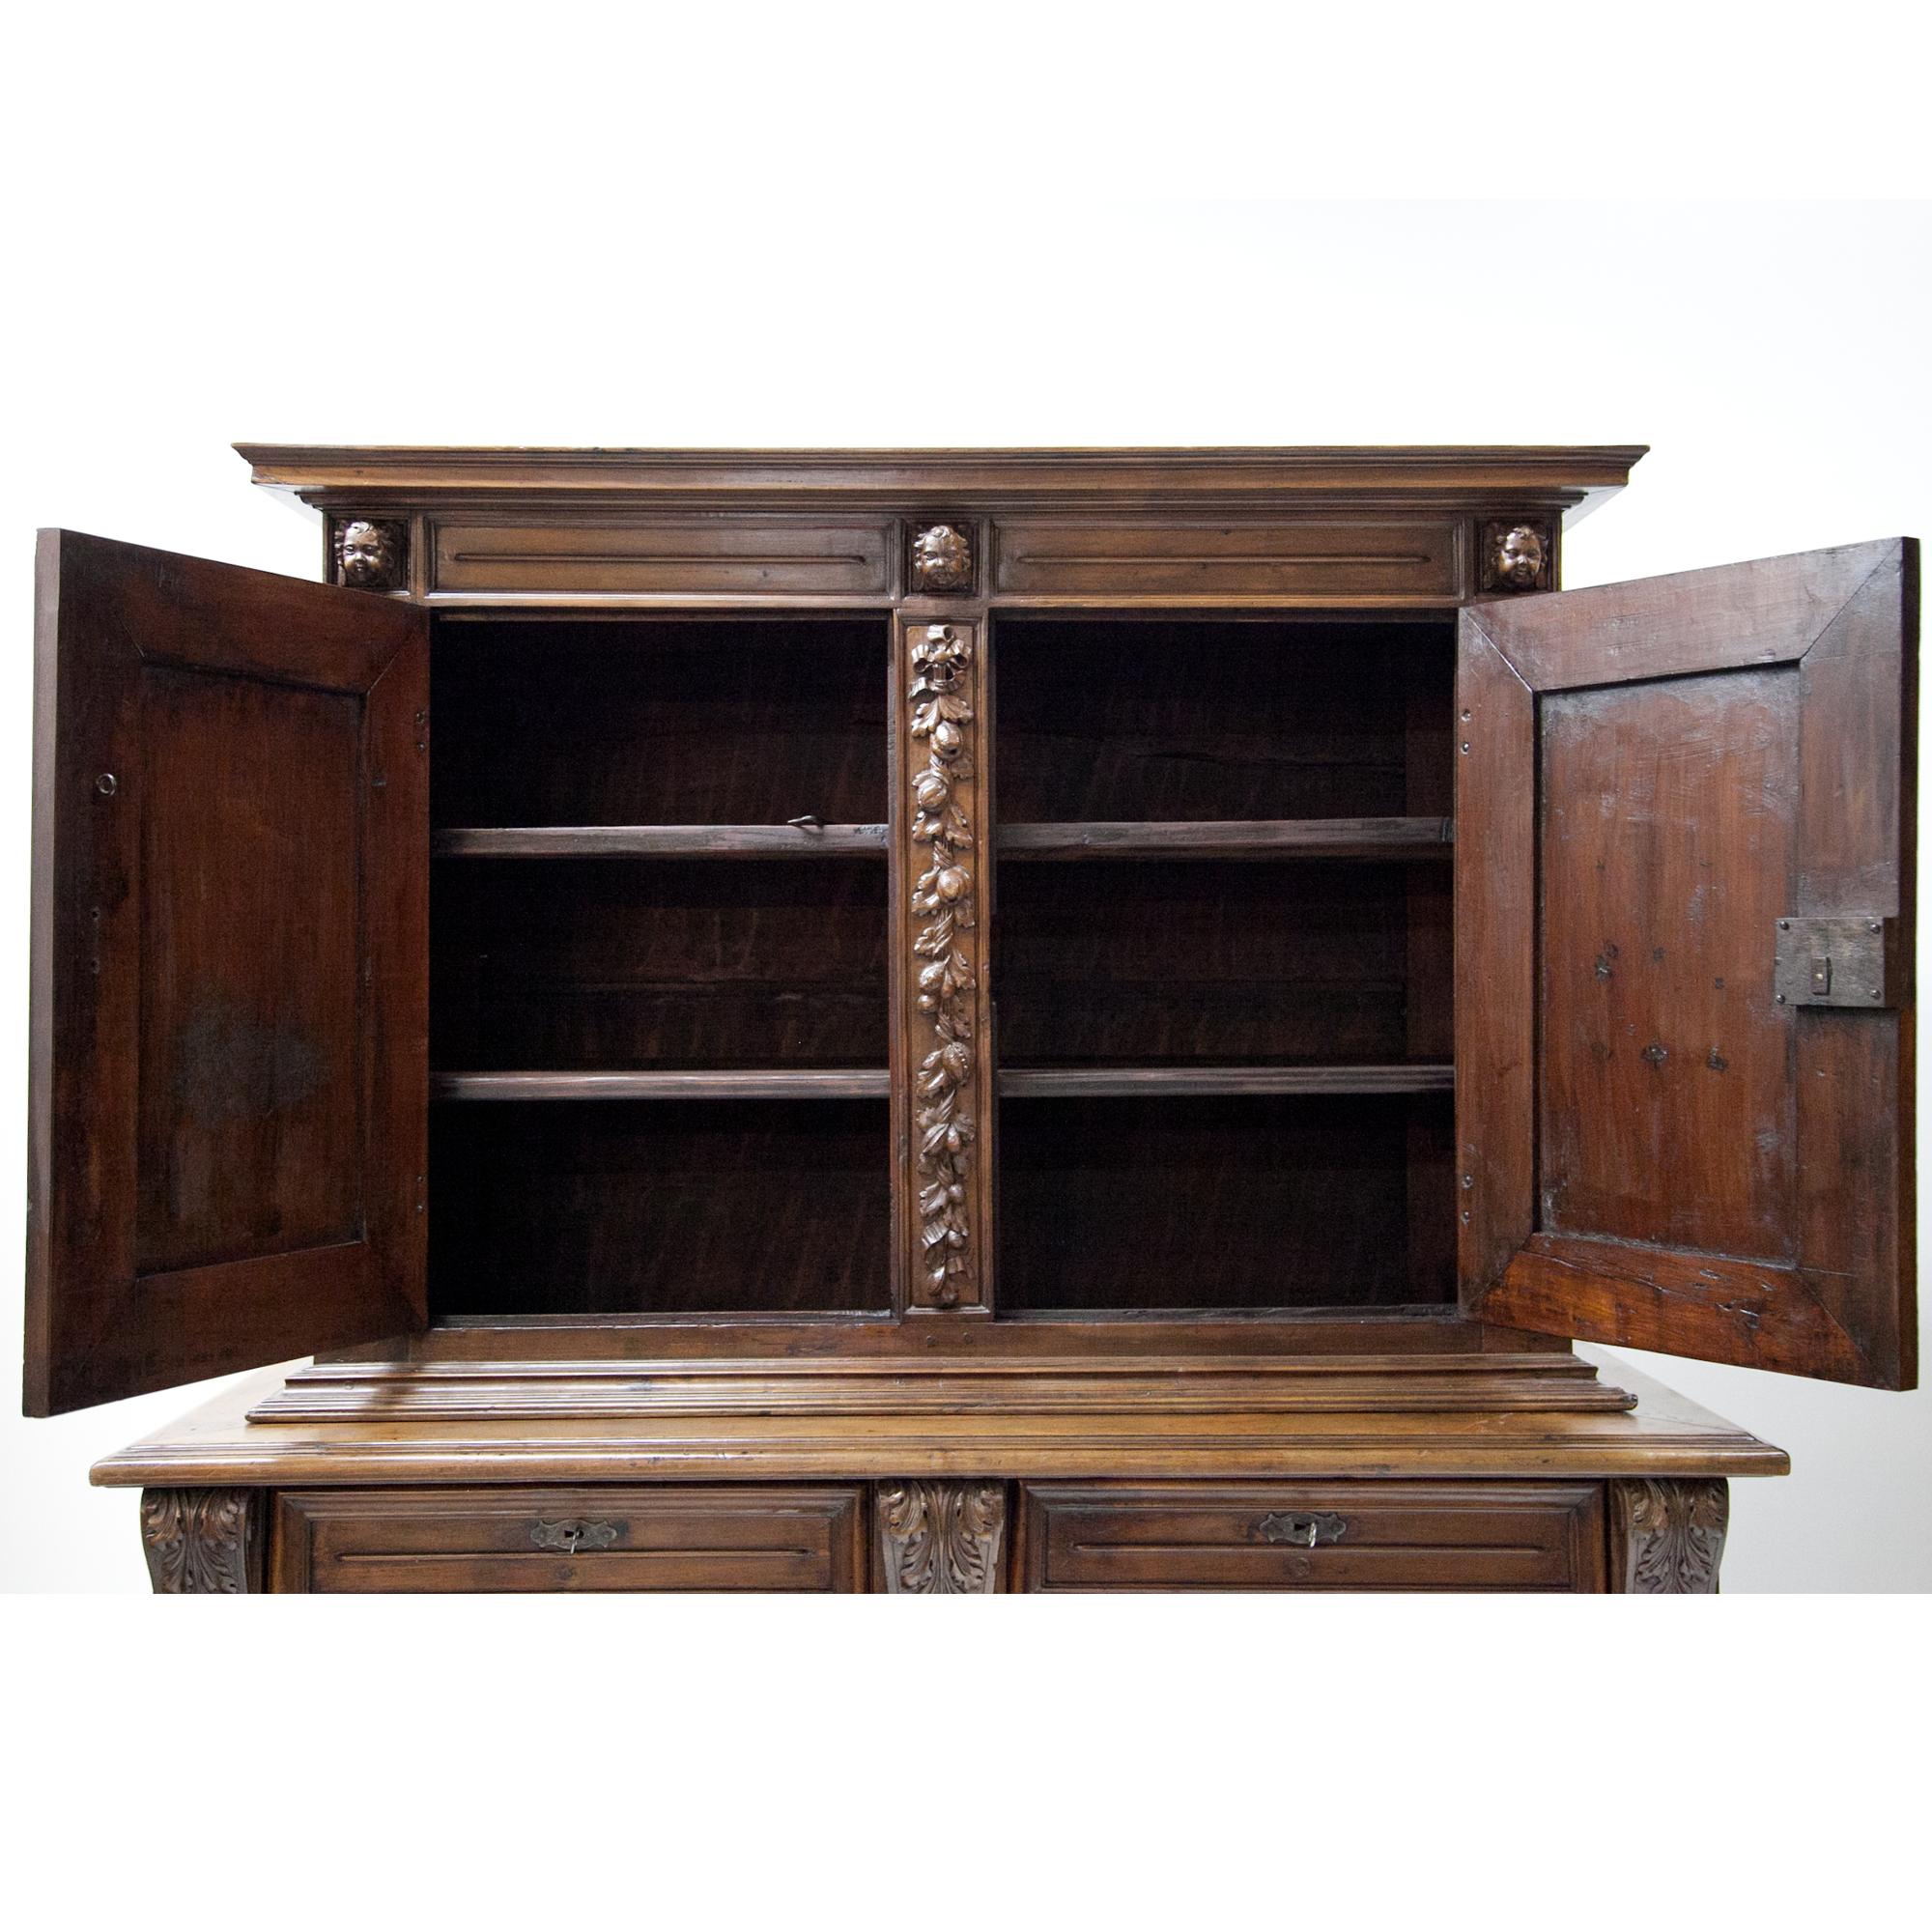 Walnut Cabinet, Probably France, Early 18th Century